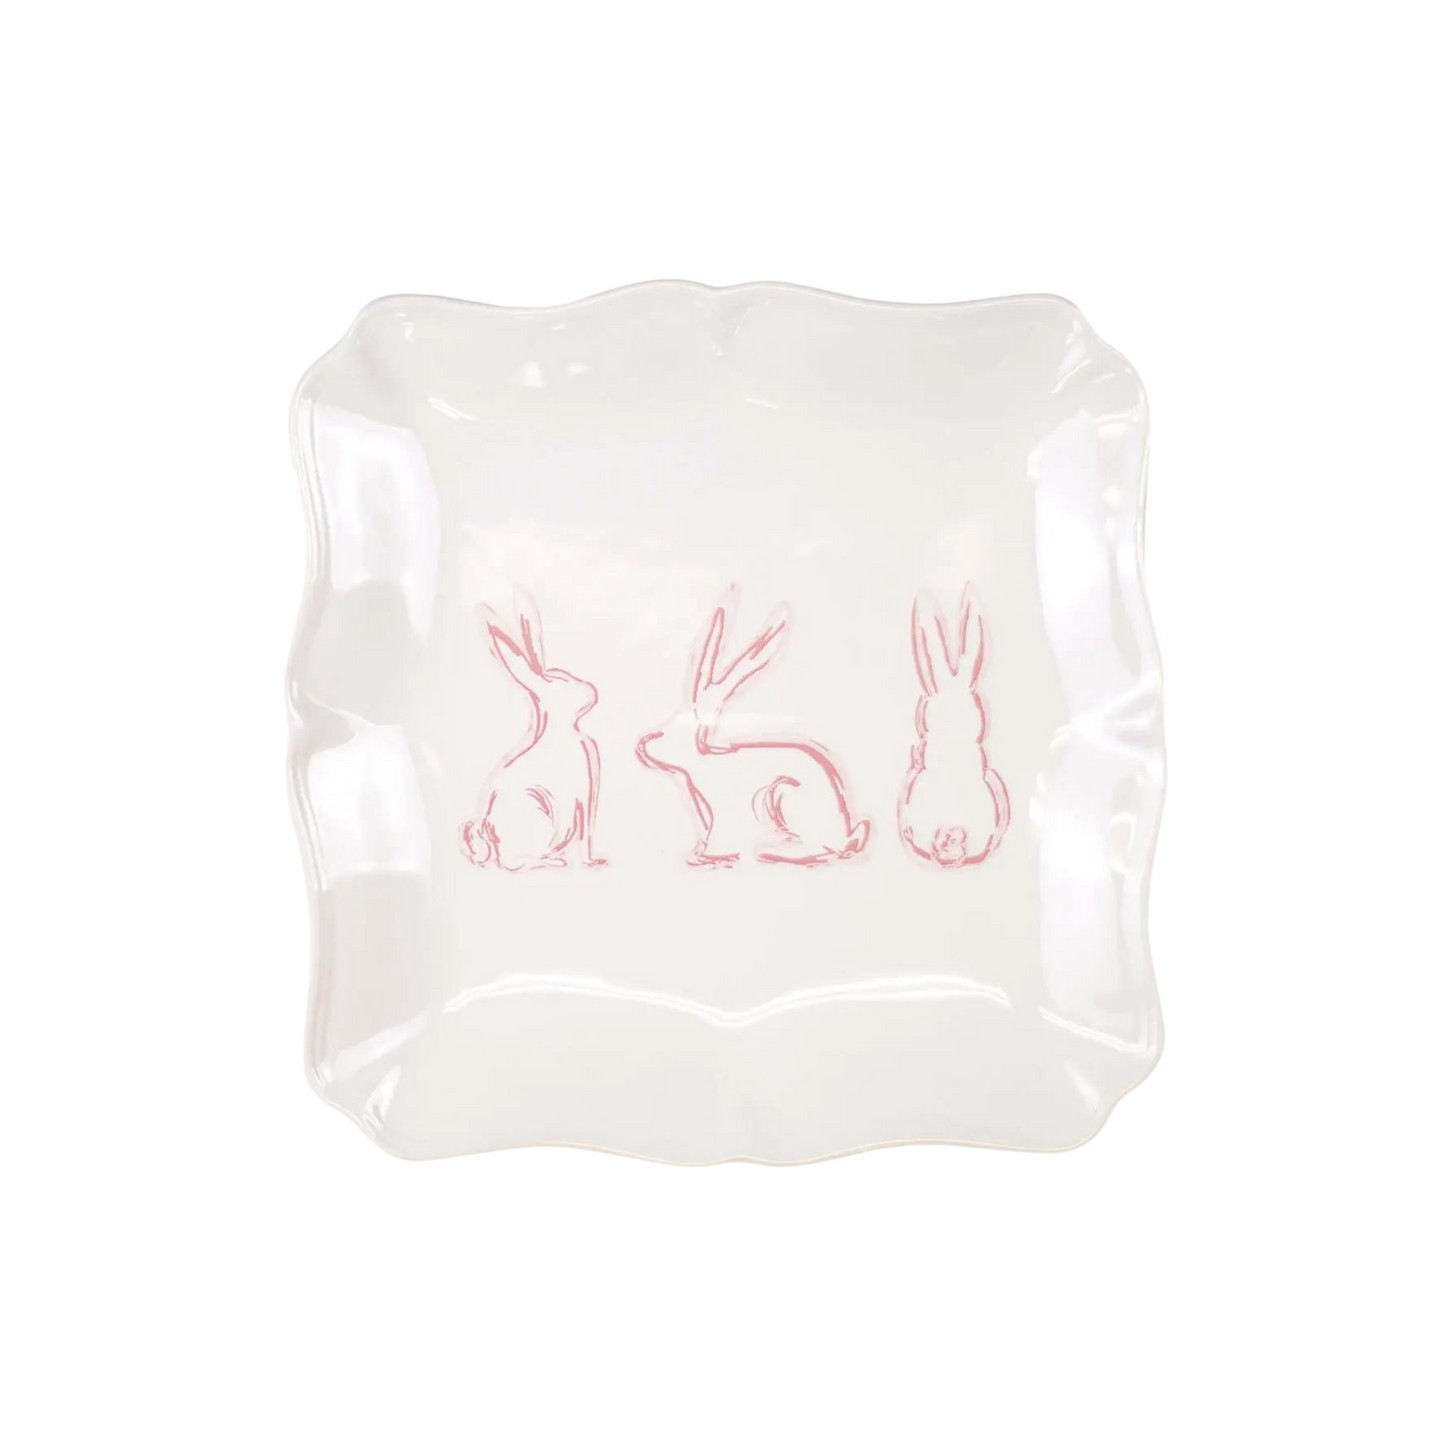 Lily Belle Bunny Square Platter